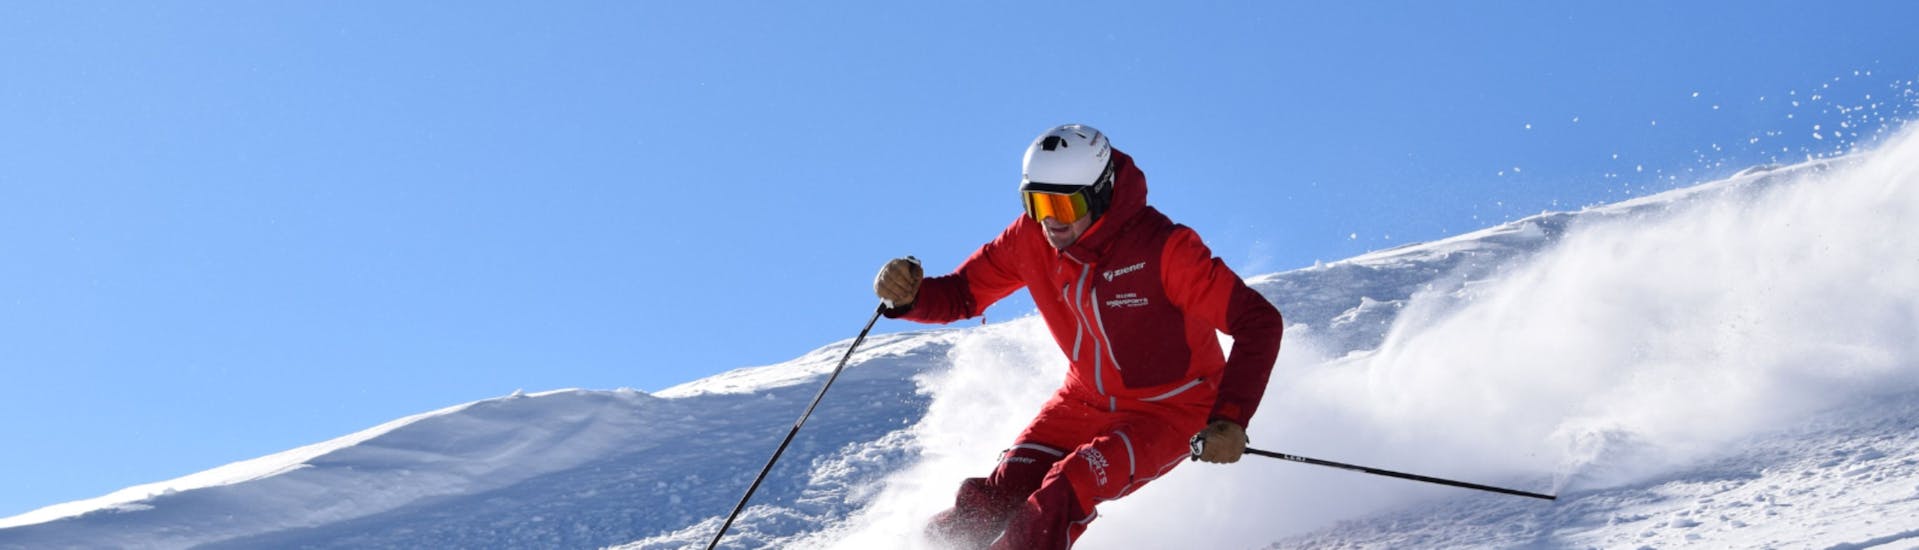 Adult Ski Lessons for Skiers with Experience.